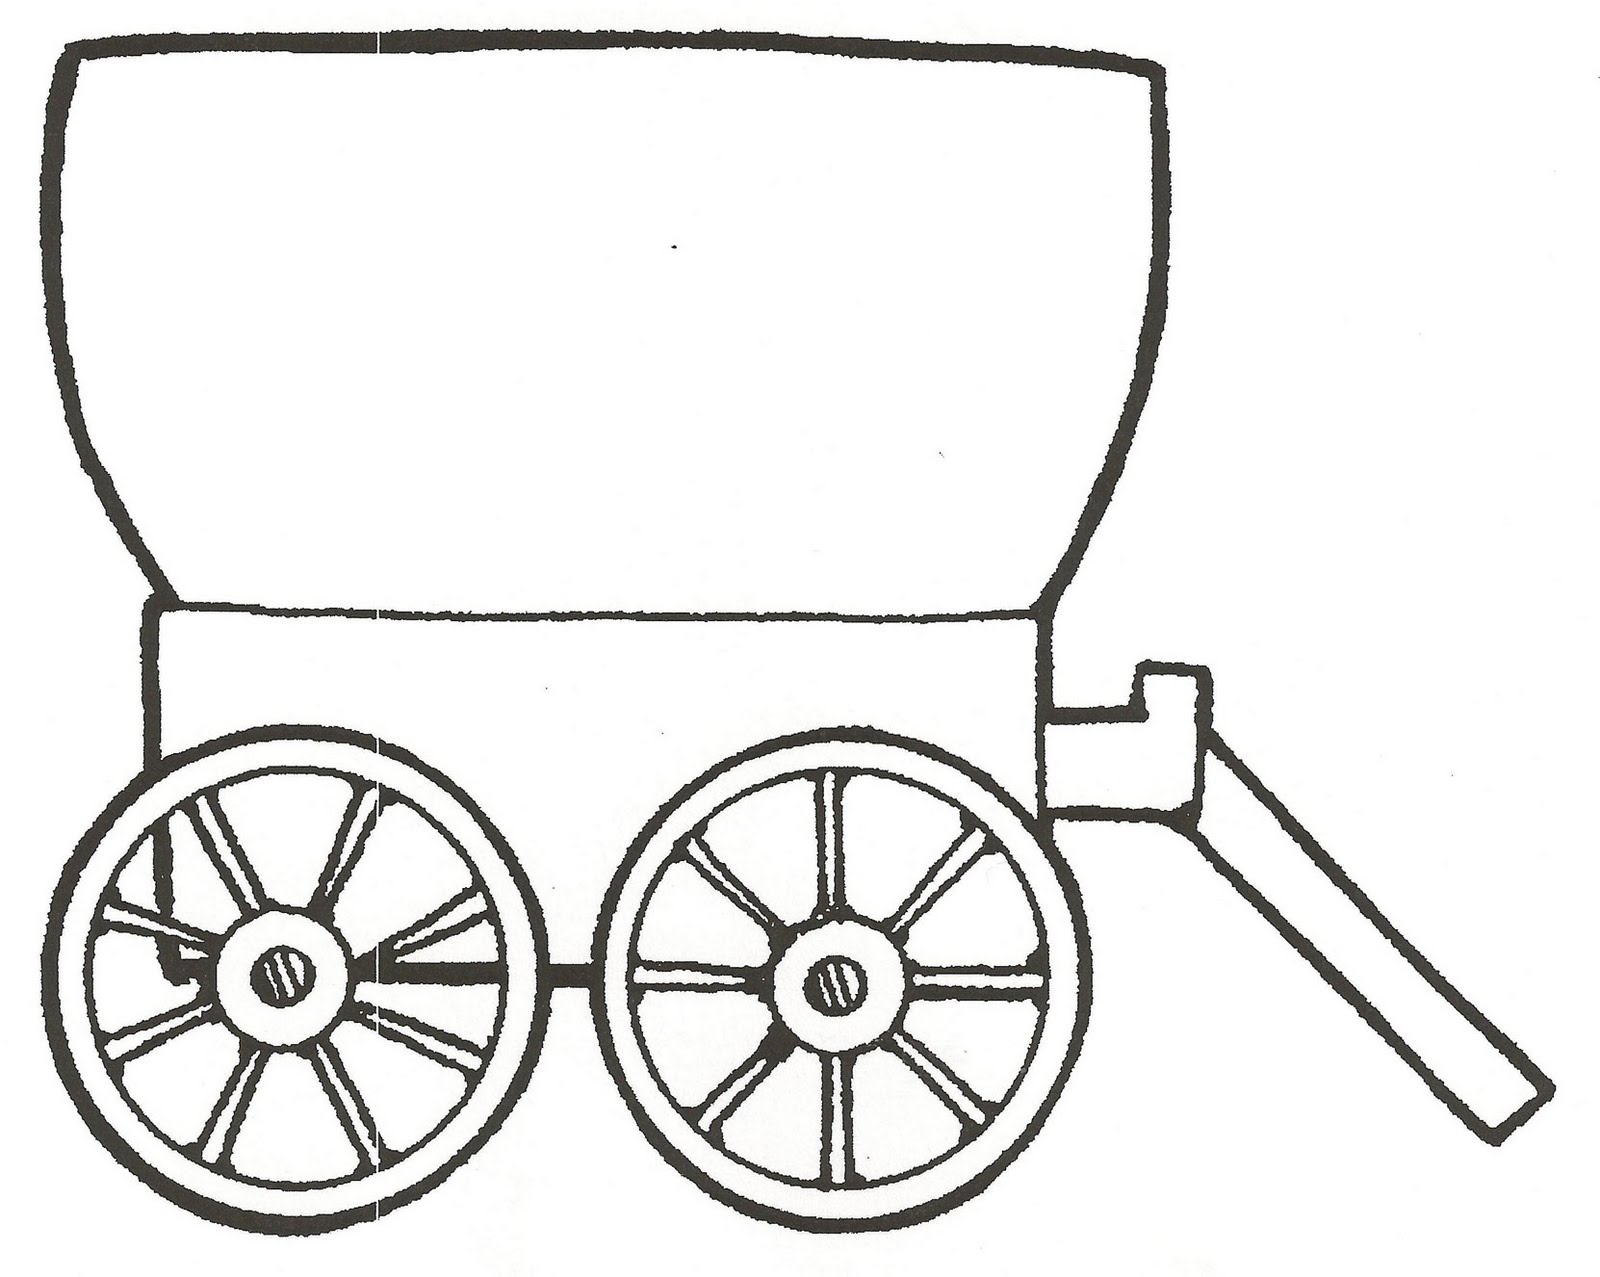 Covered Wagon Clip Art - ClipArt Best - Cliparts.co